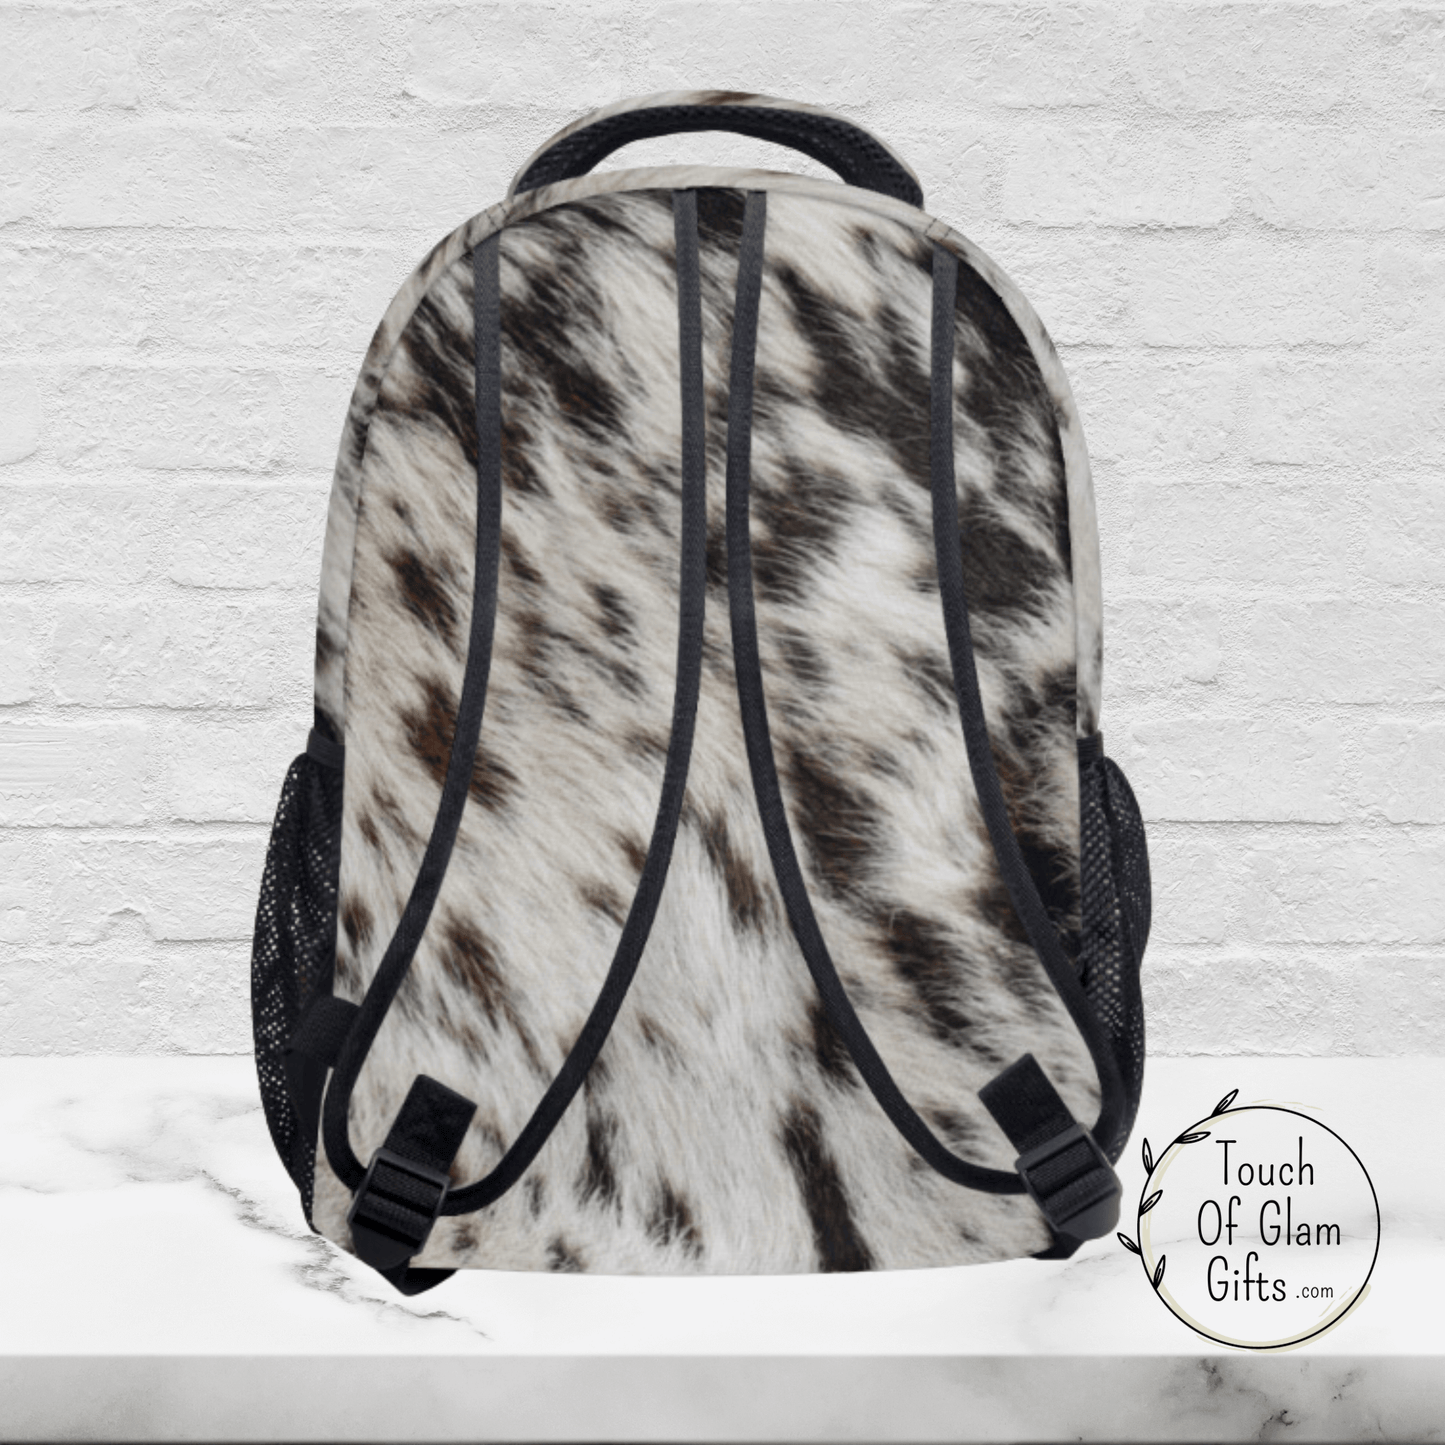 The backside of our cow print bag shows cow print on all sides of the bag even the straps.